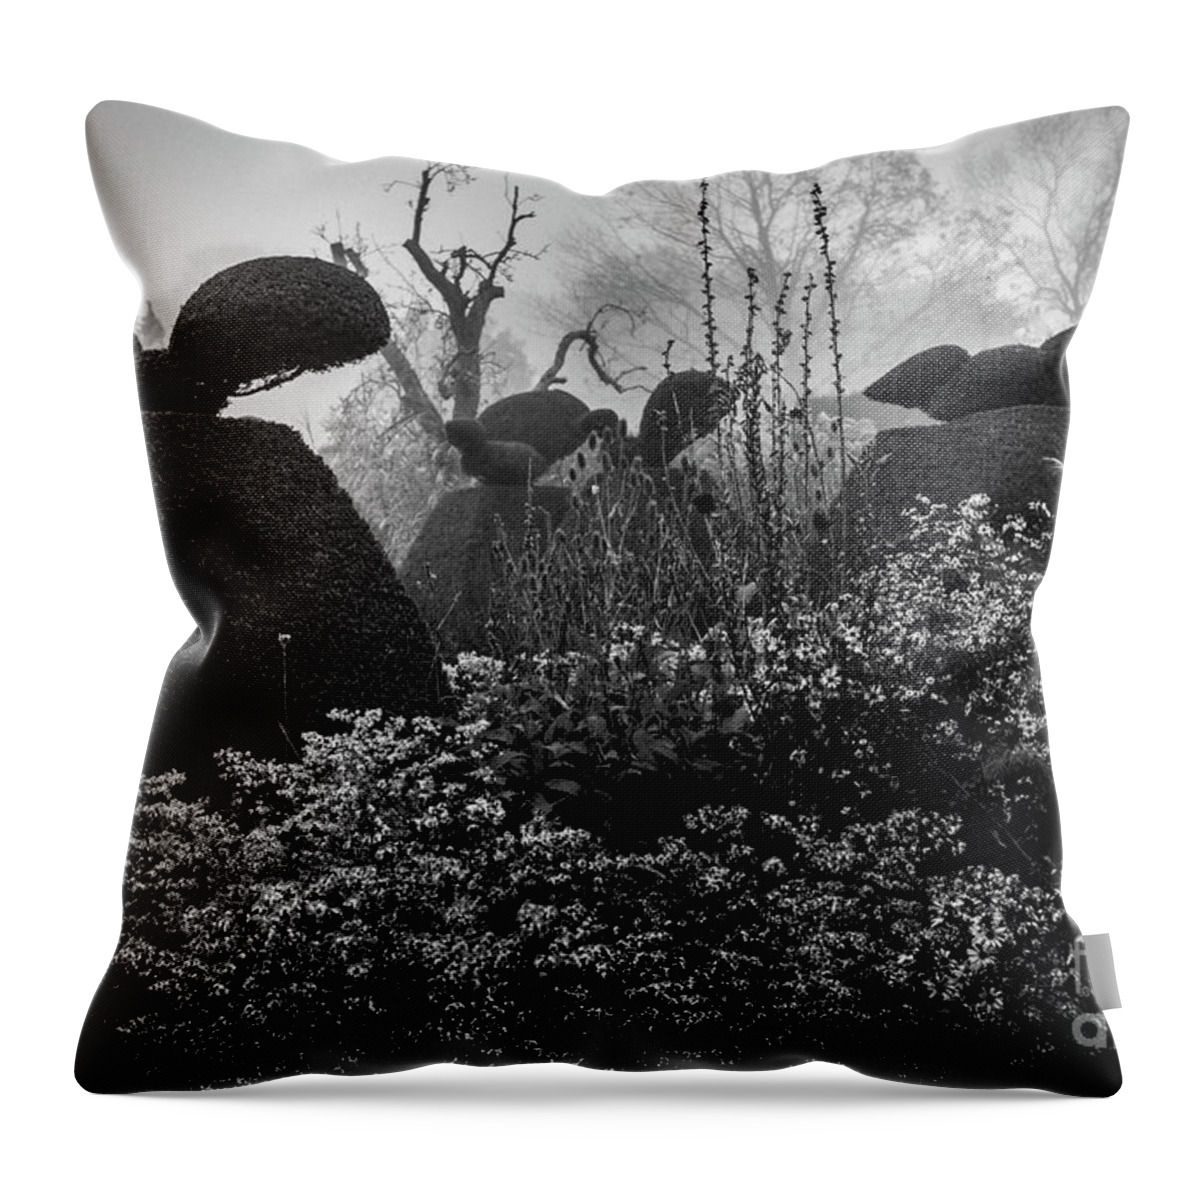 Plants Throw Pillow featuring the photograph The Peacock Garden, Great Dixter by Perry Rodriguez